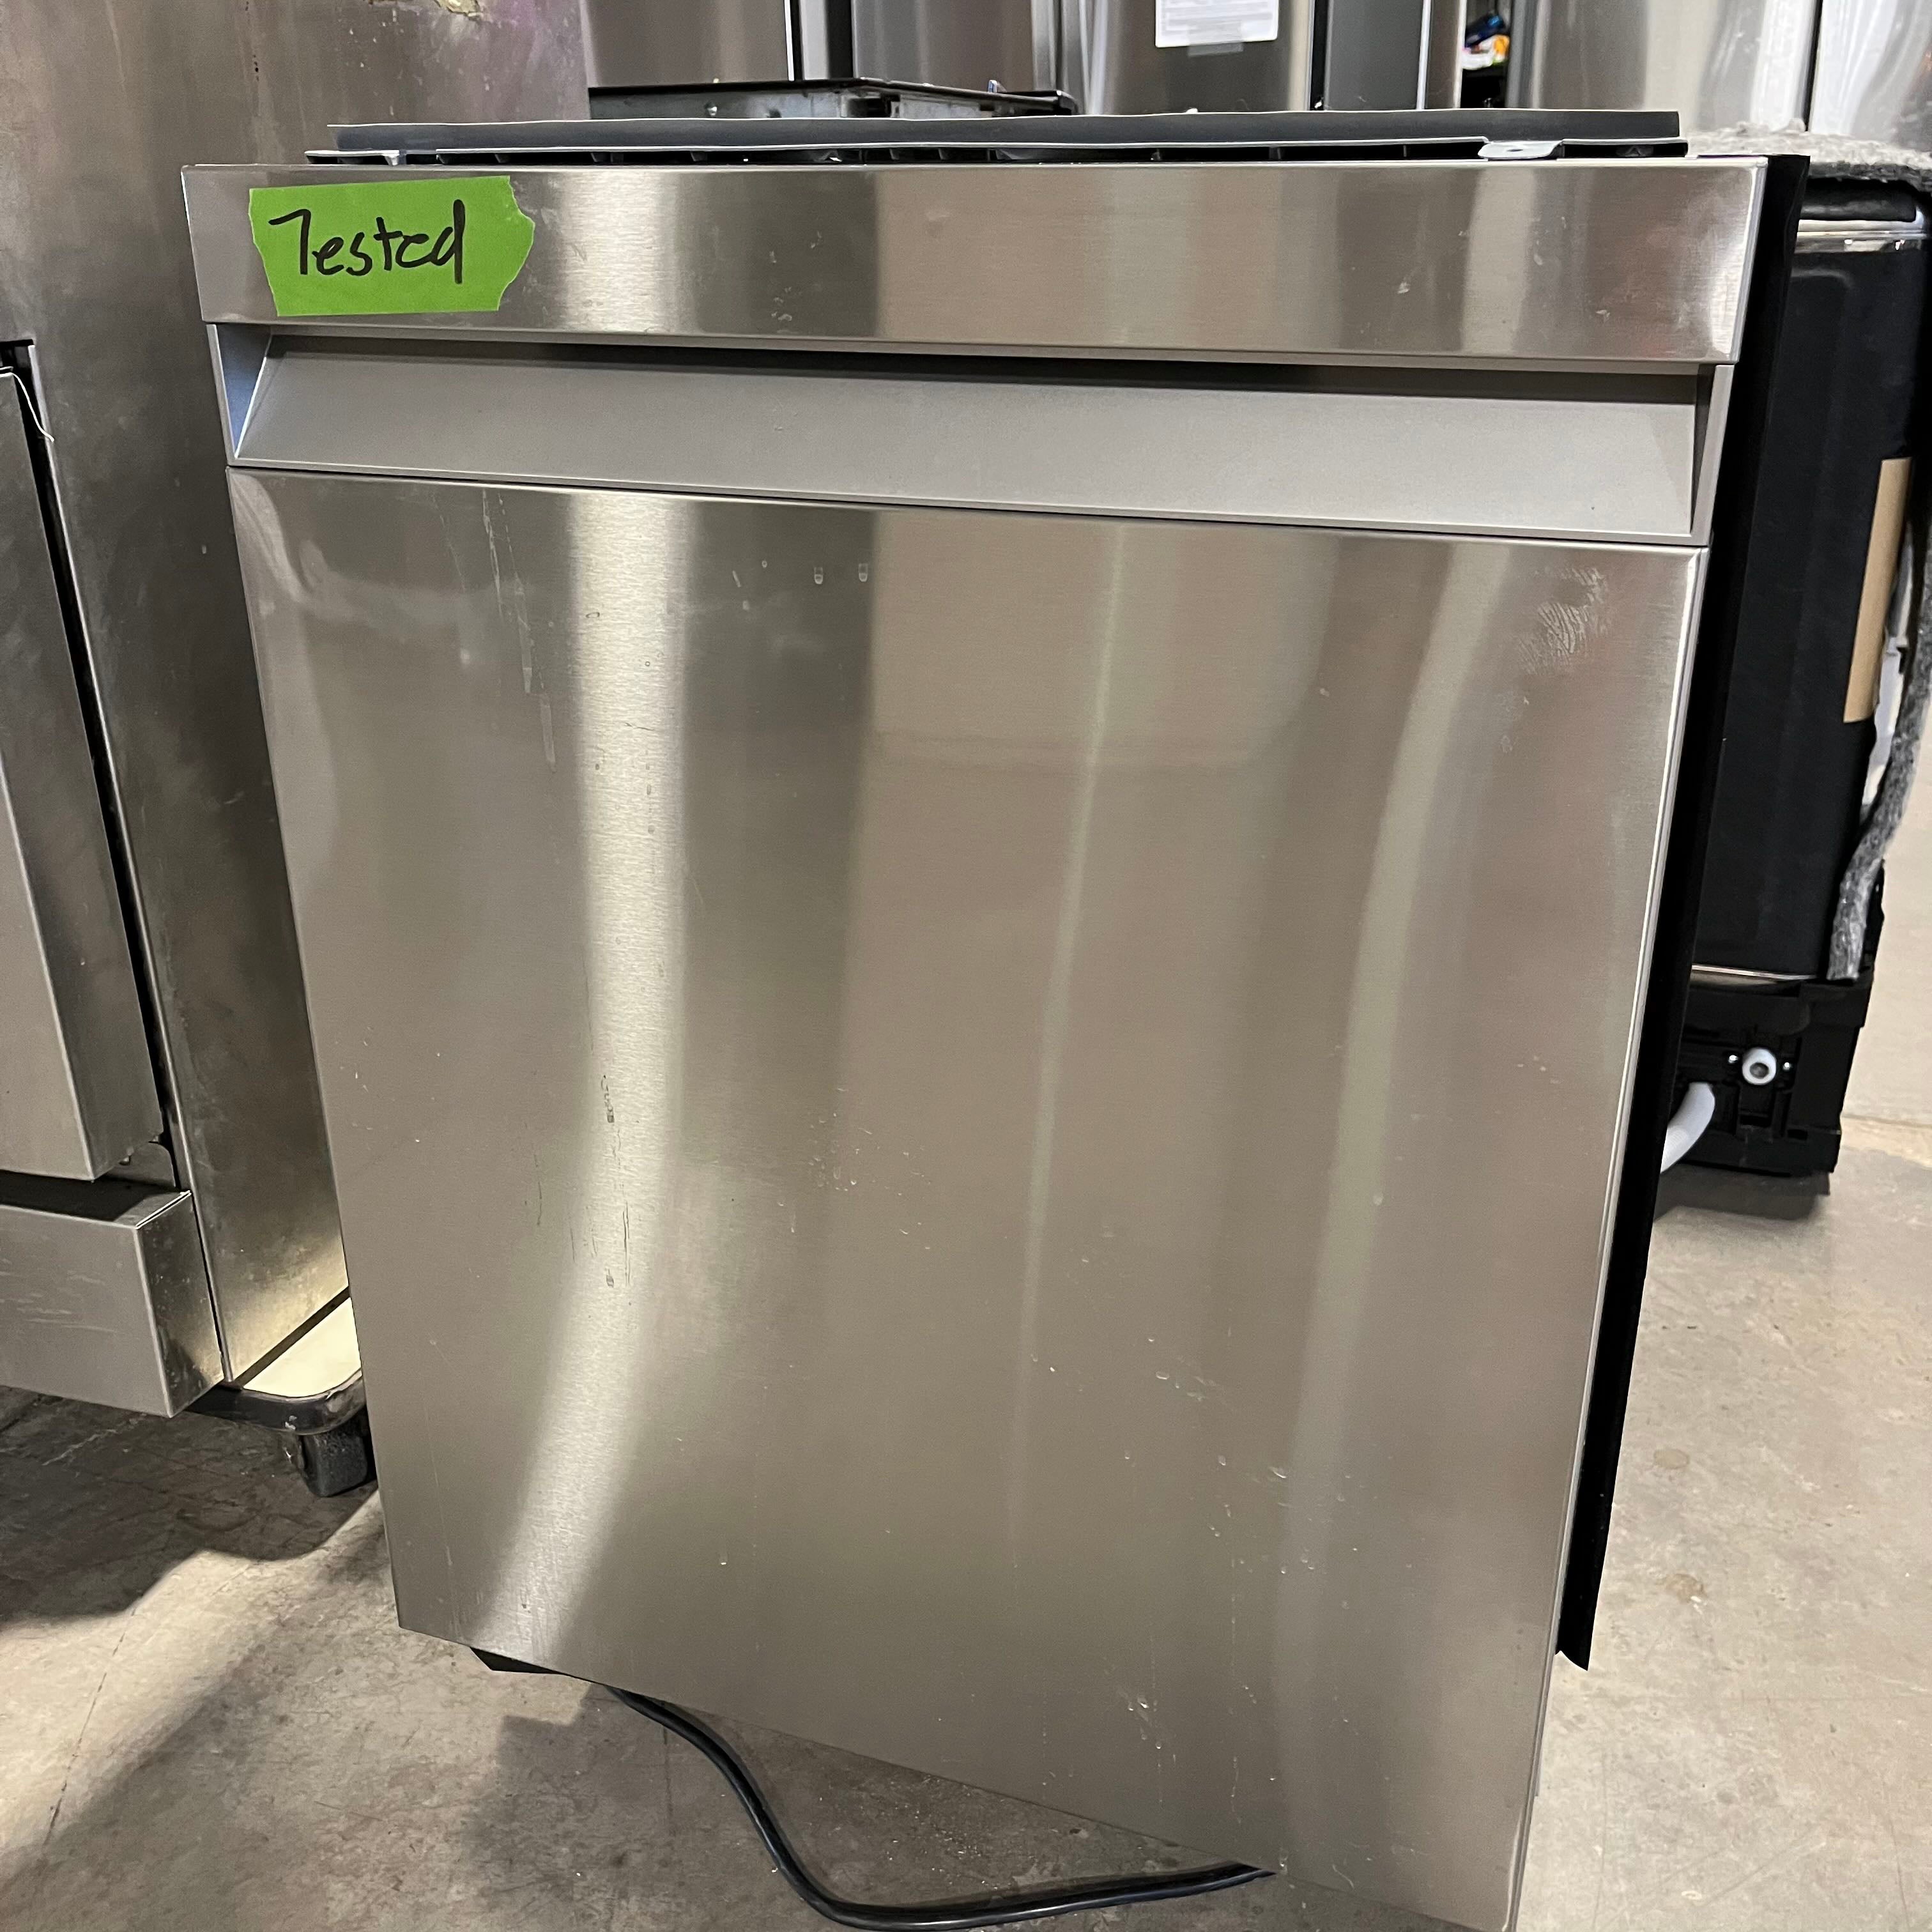 C123 Samsung 24" Top Control Stainless Steel Dishwasher